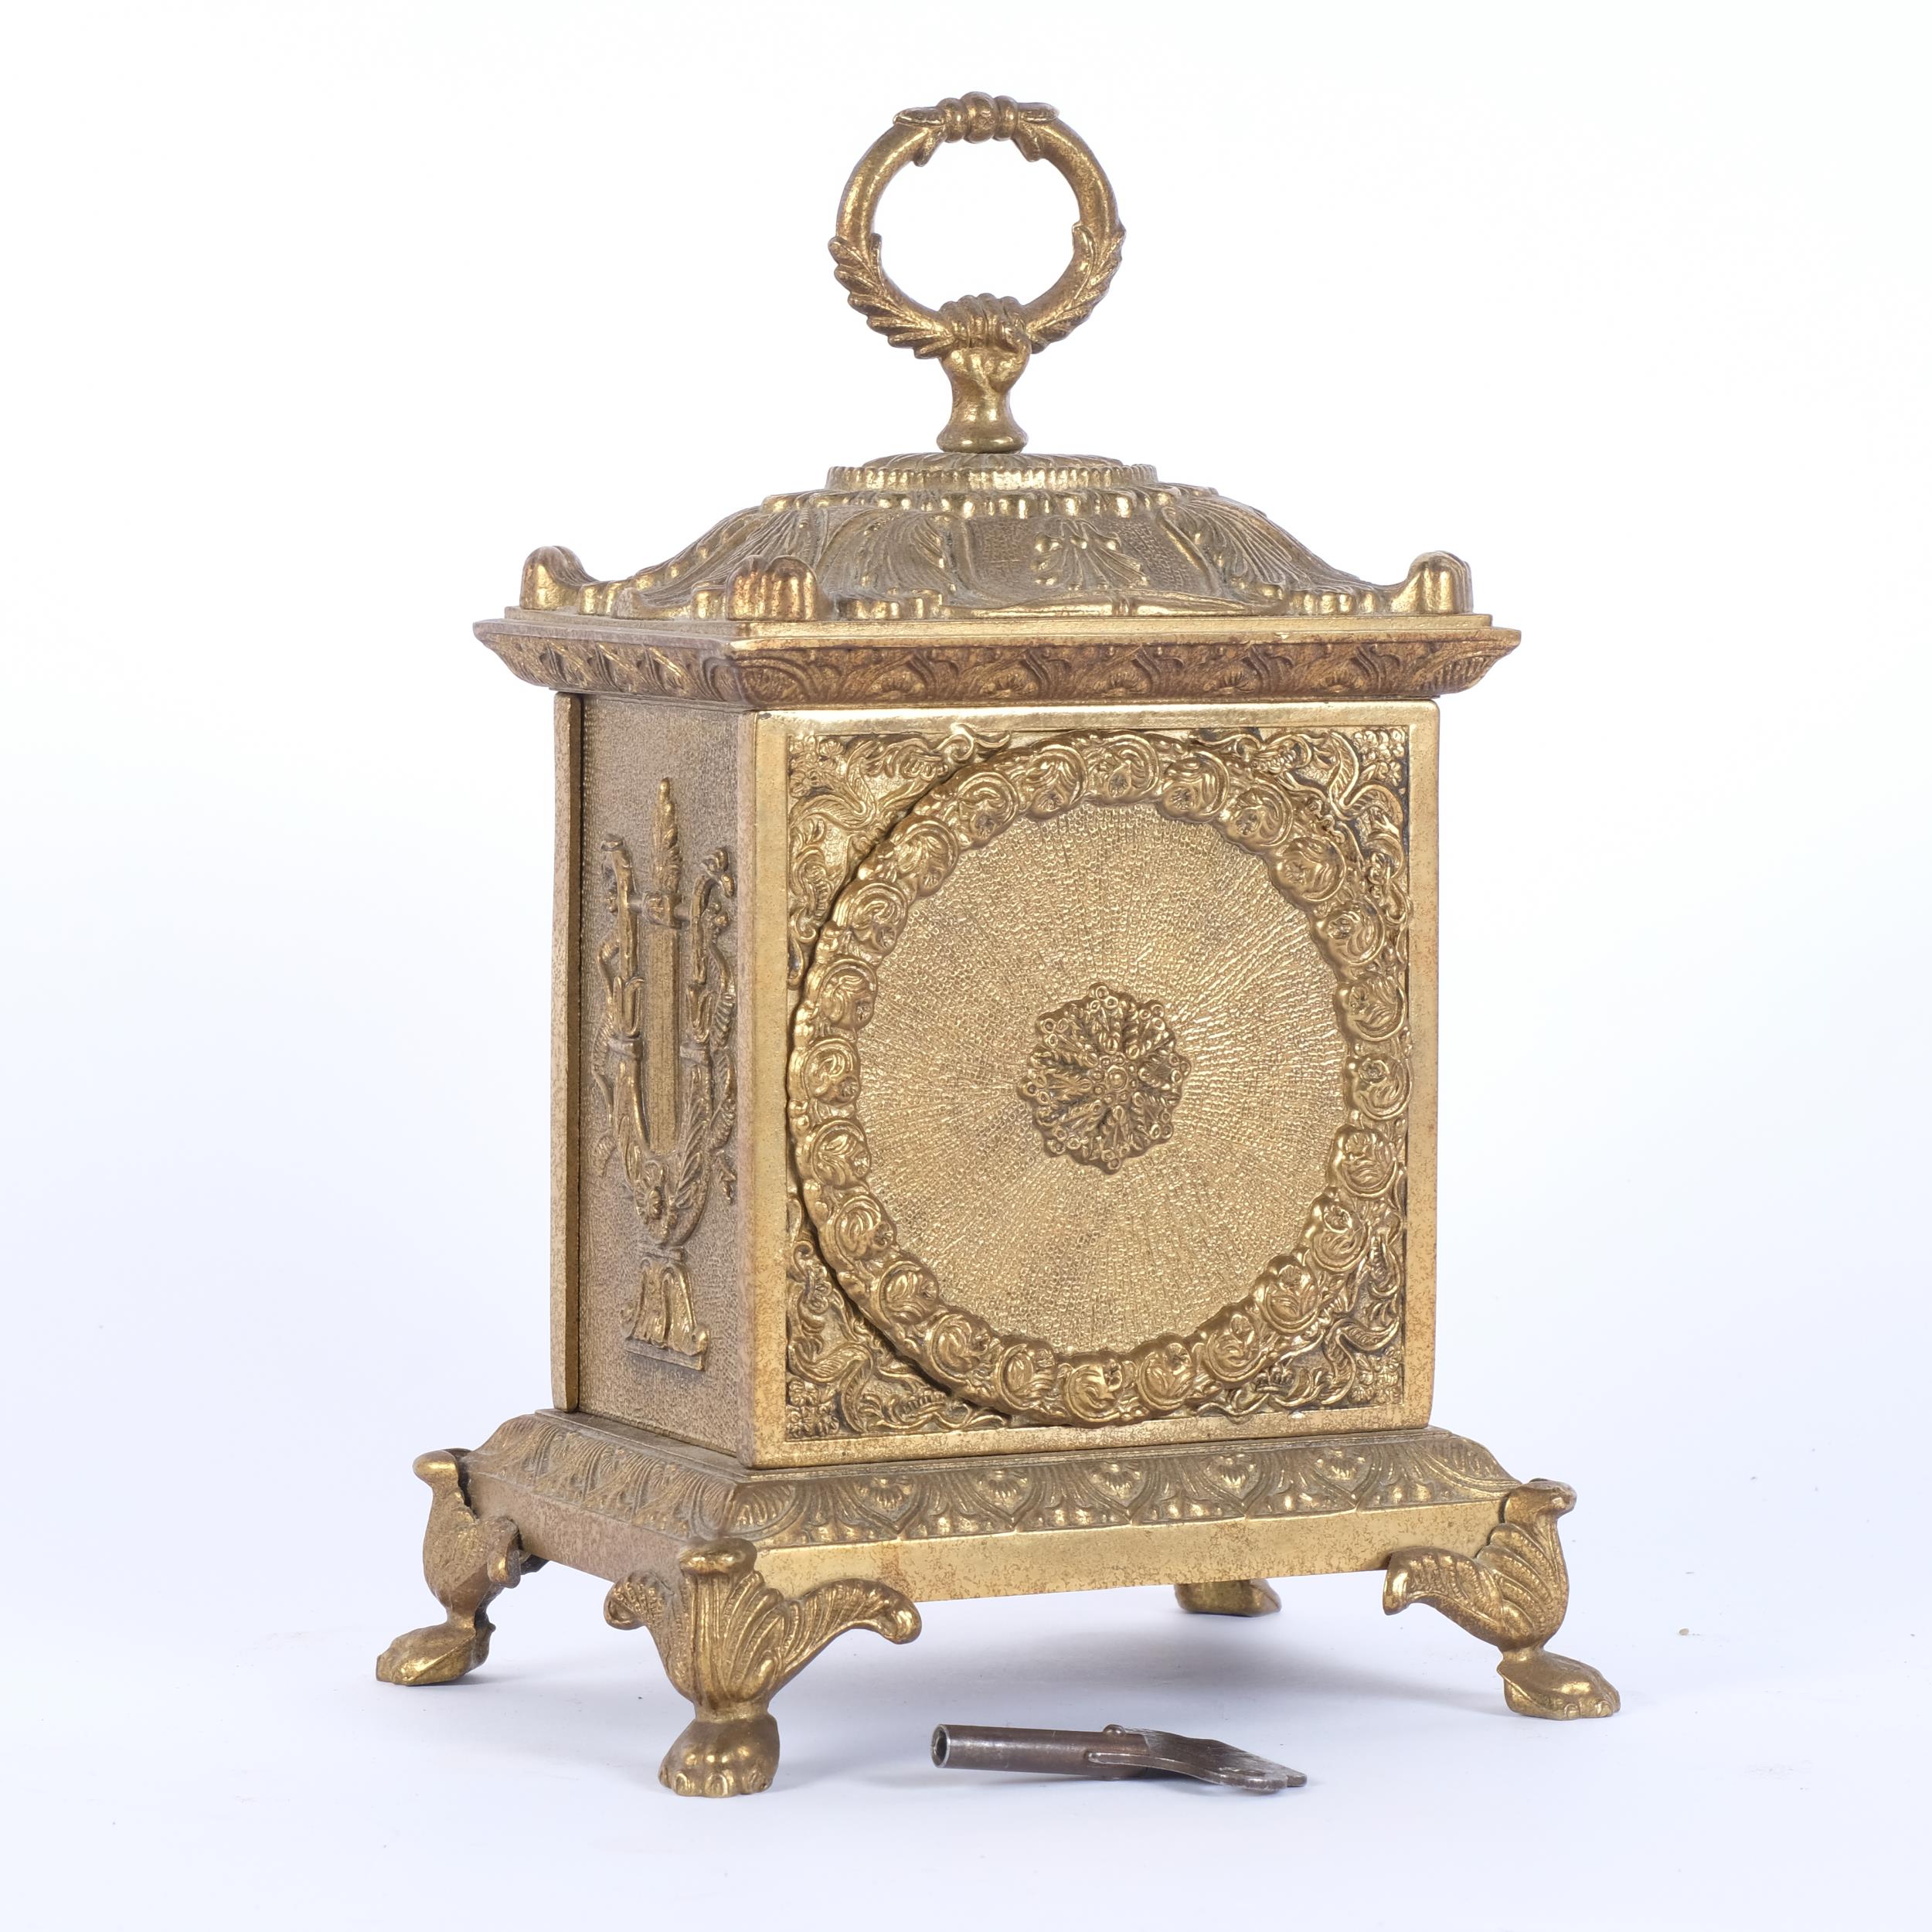 A small gilt-metal mantel clock, 8-day striking movement, enamelled batons and Roman numerals, - Image 2 of 2